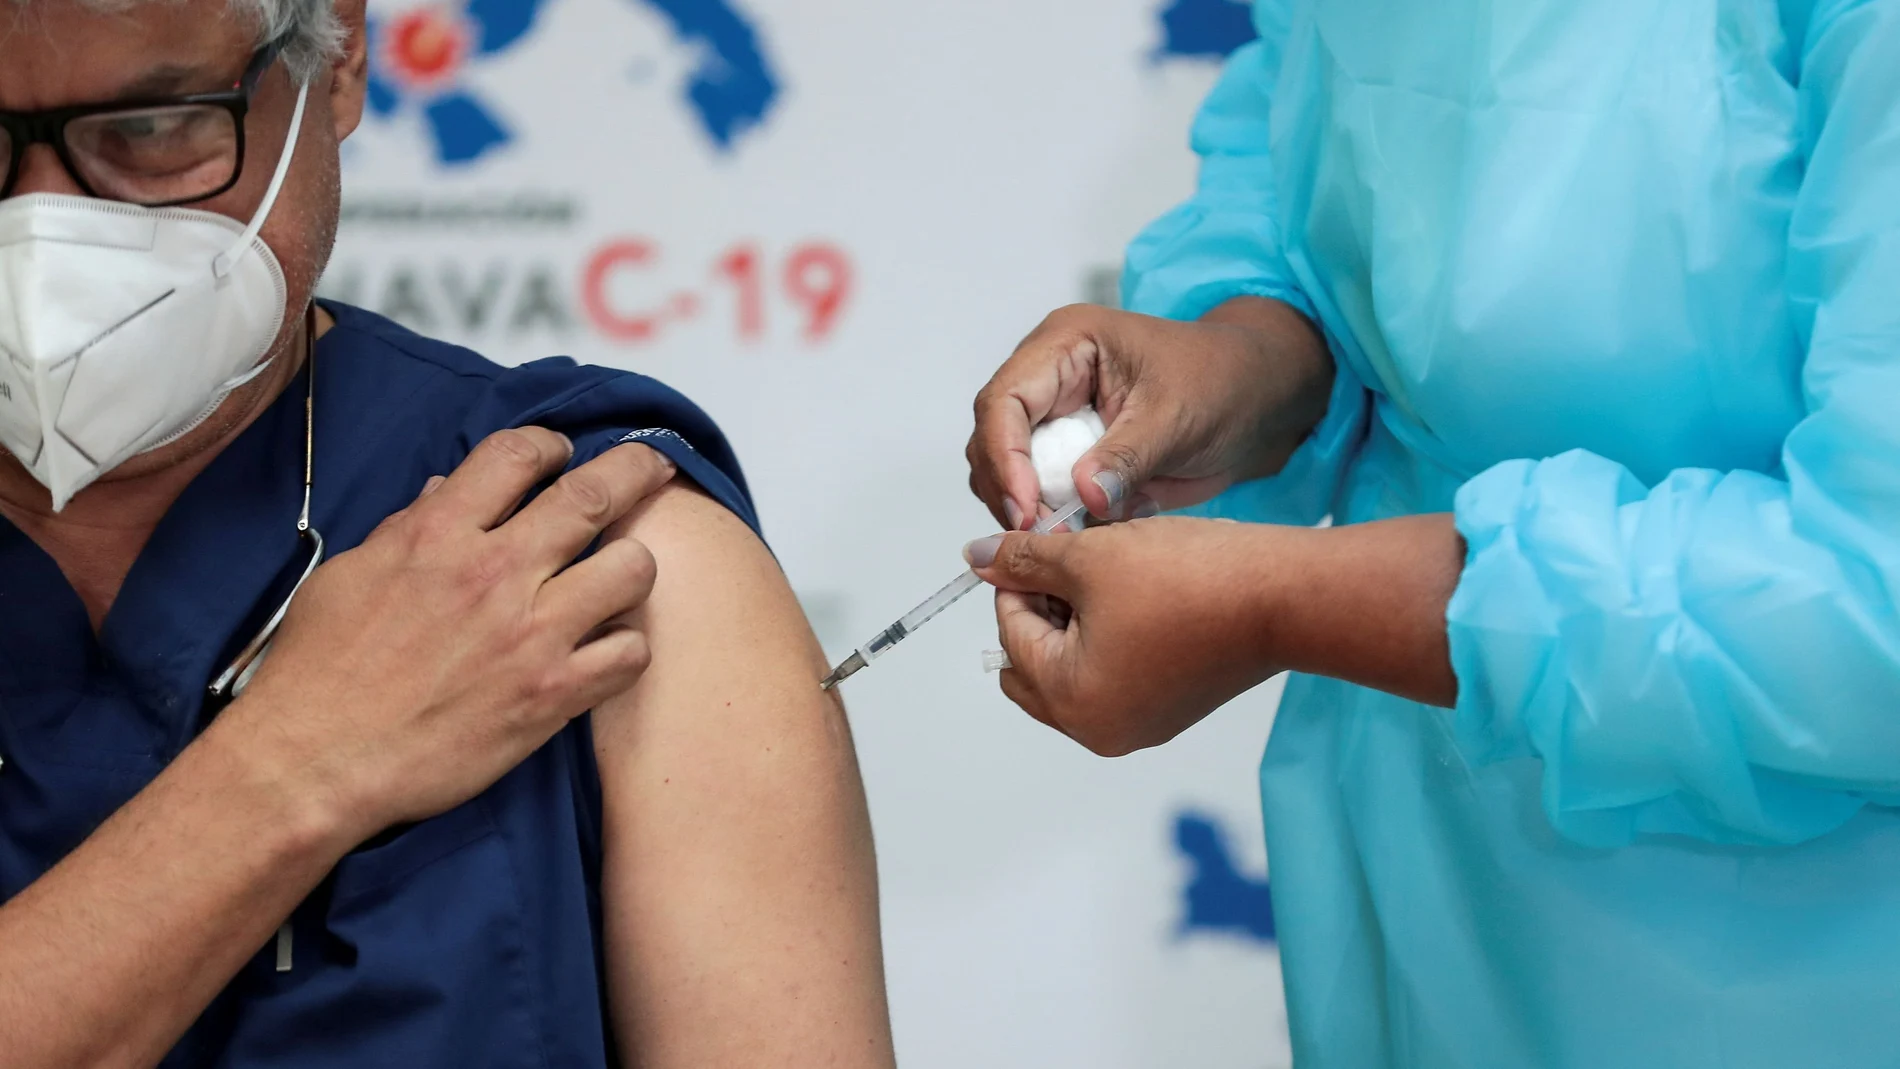 FILE PHOTO: A Panamanian health worker receives the second shot of the Pfizer-BioNTech COVID-19 vaccine at the Santo Tomas Hospital, in Panama City, Panama February 17, 2021. REUTERS/Erick Marciscano/File Photo